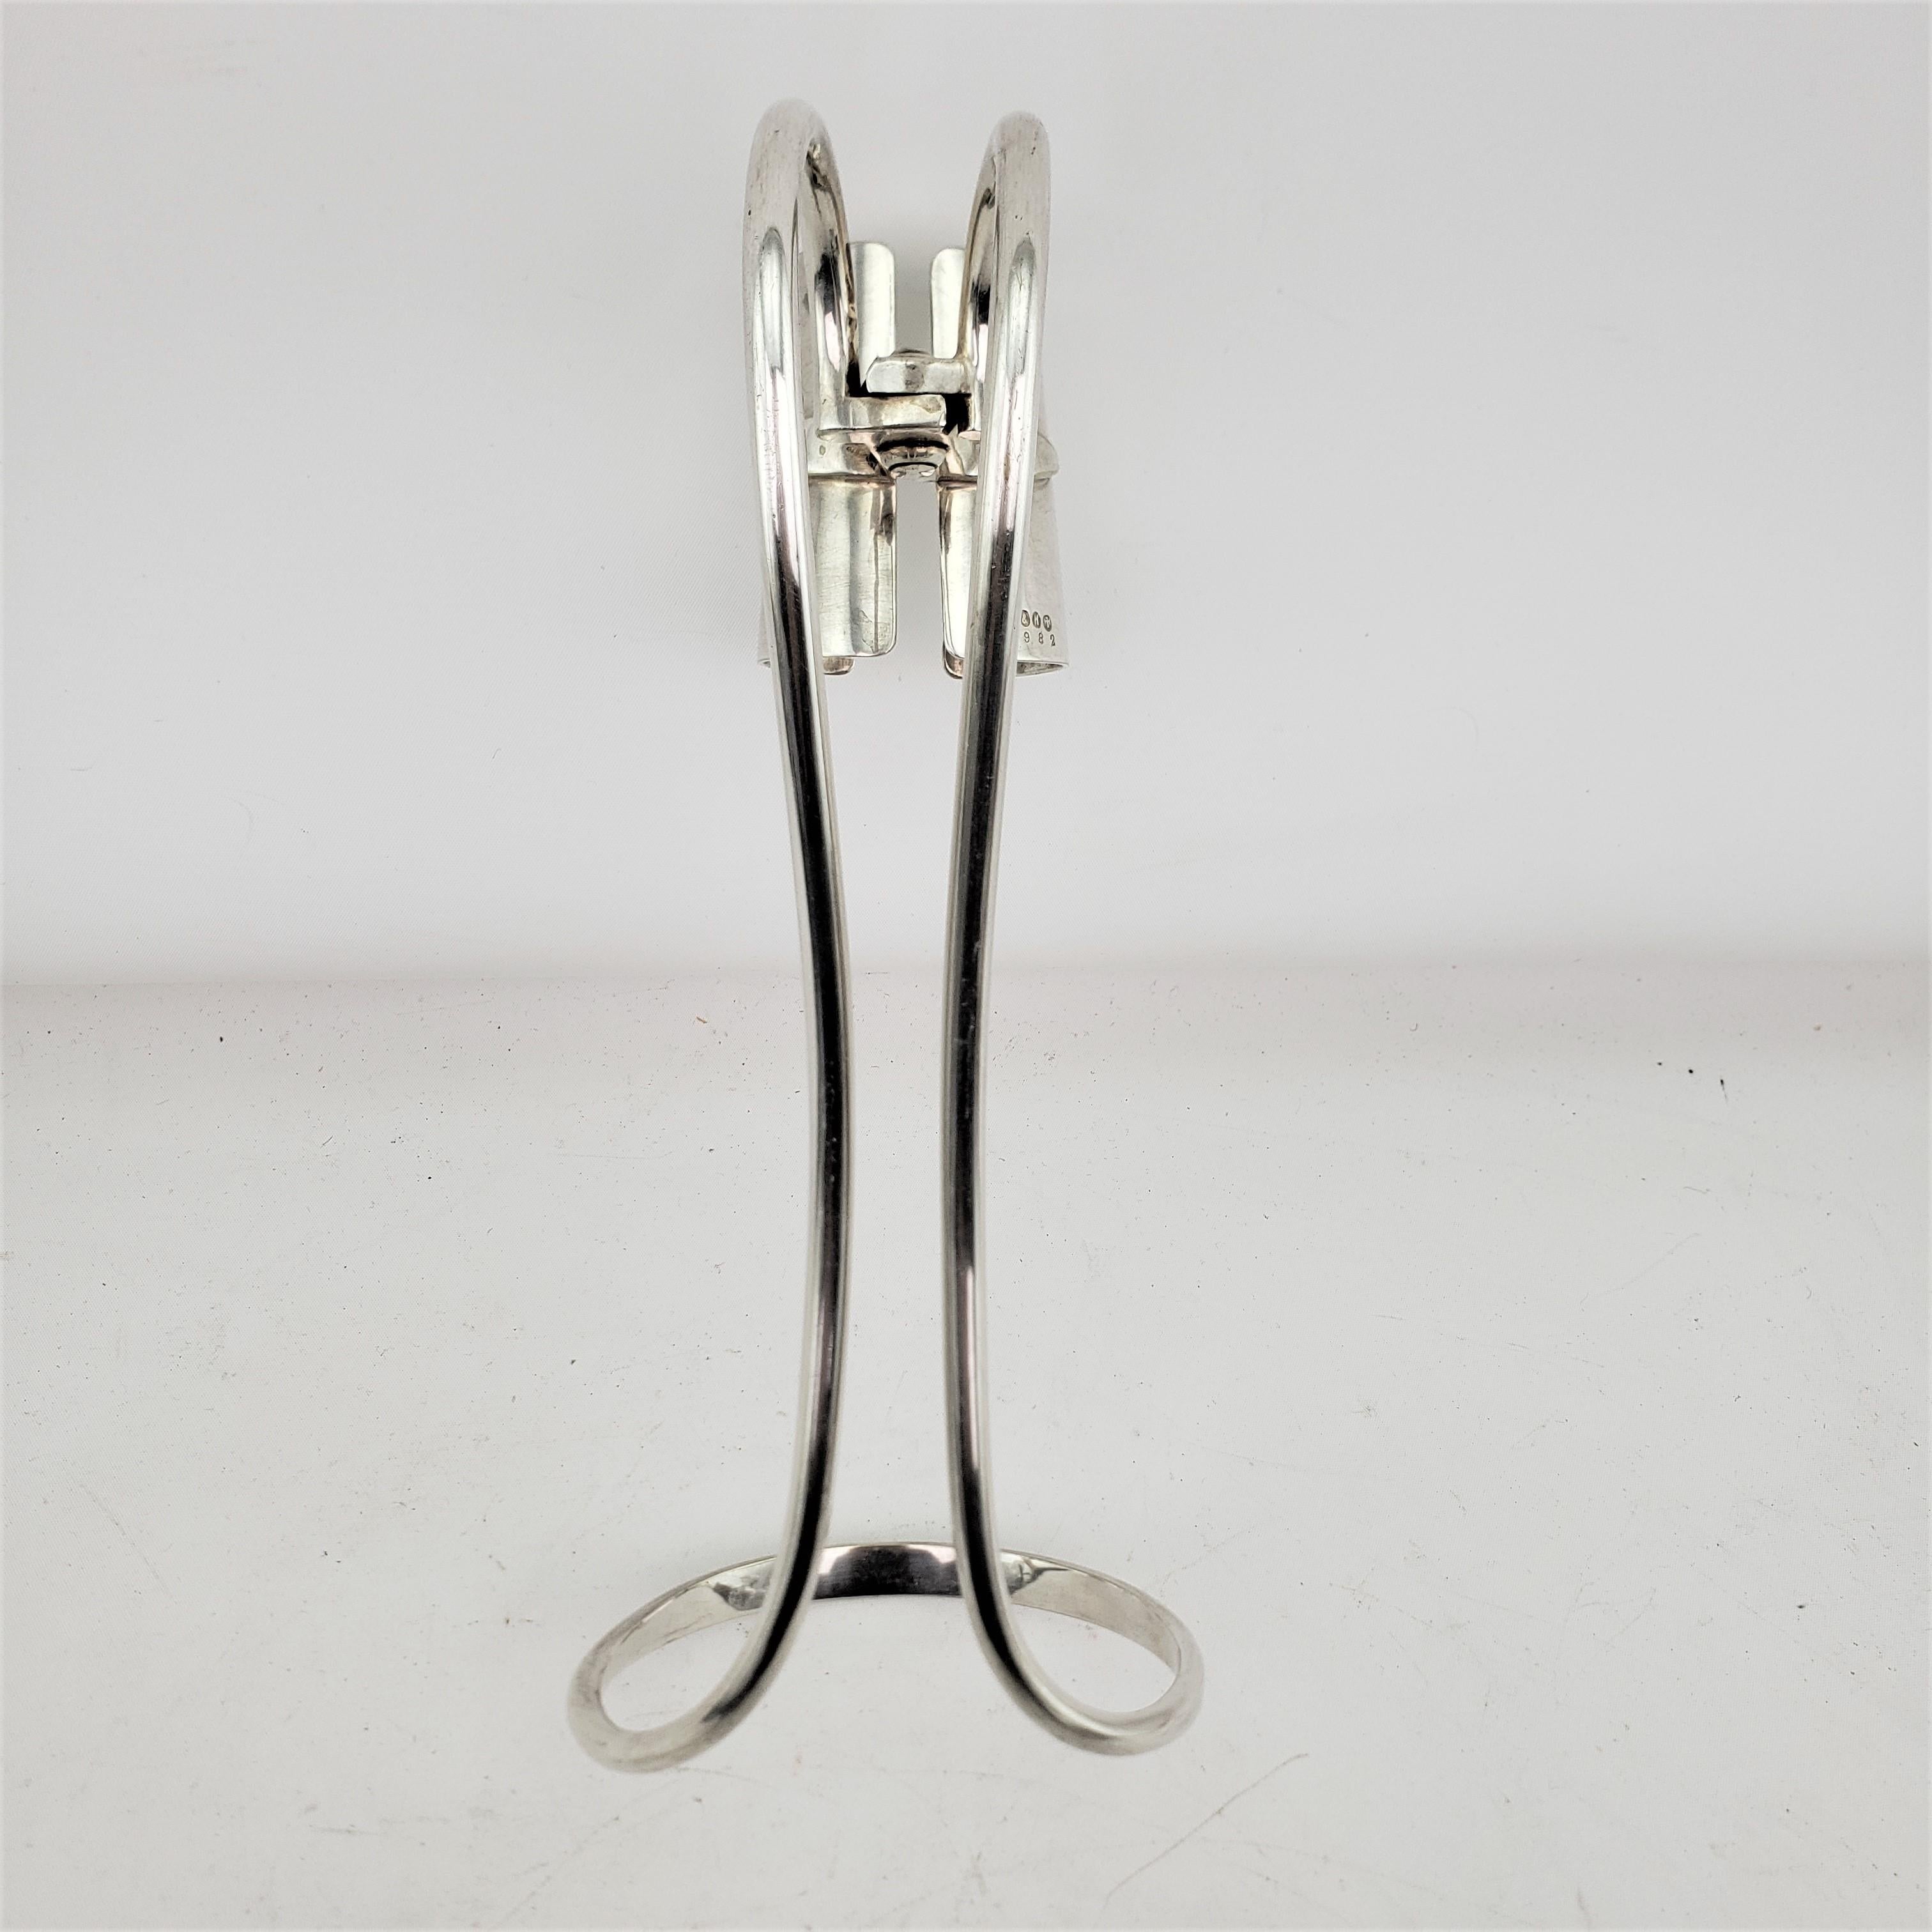 English Antique Silver Plated Wine Bottle Holder, Server or Caddy For Sale